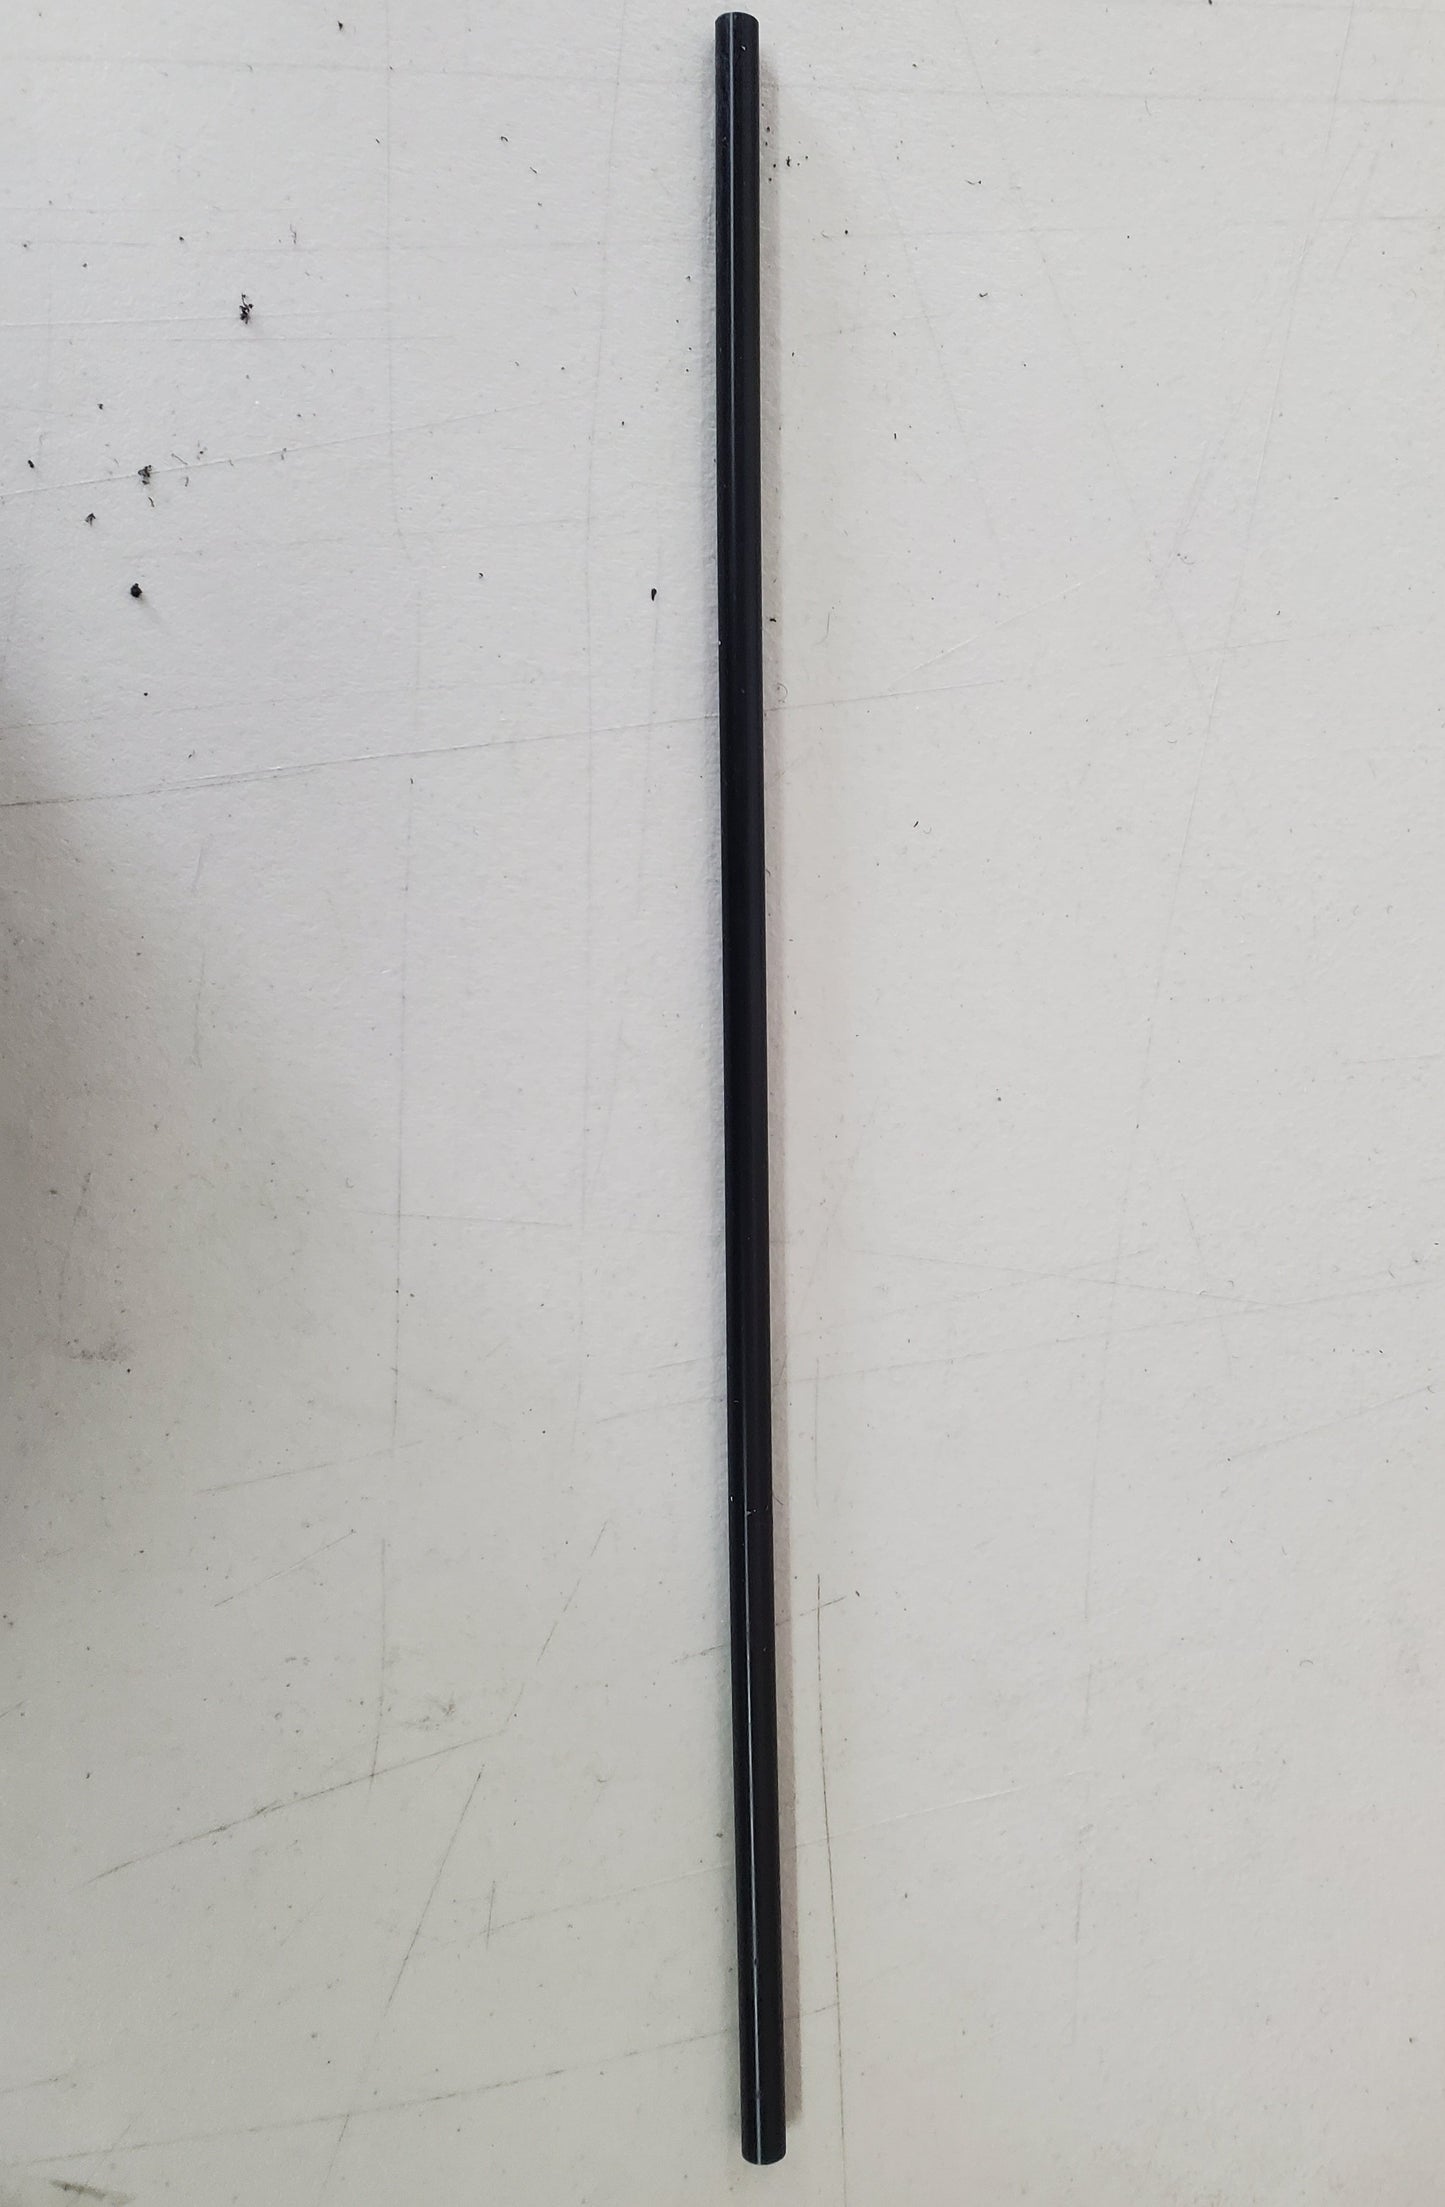 Create your own boom sprayer Polypropylene wand lengths (18 inches long)